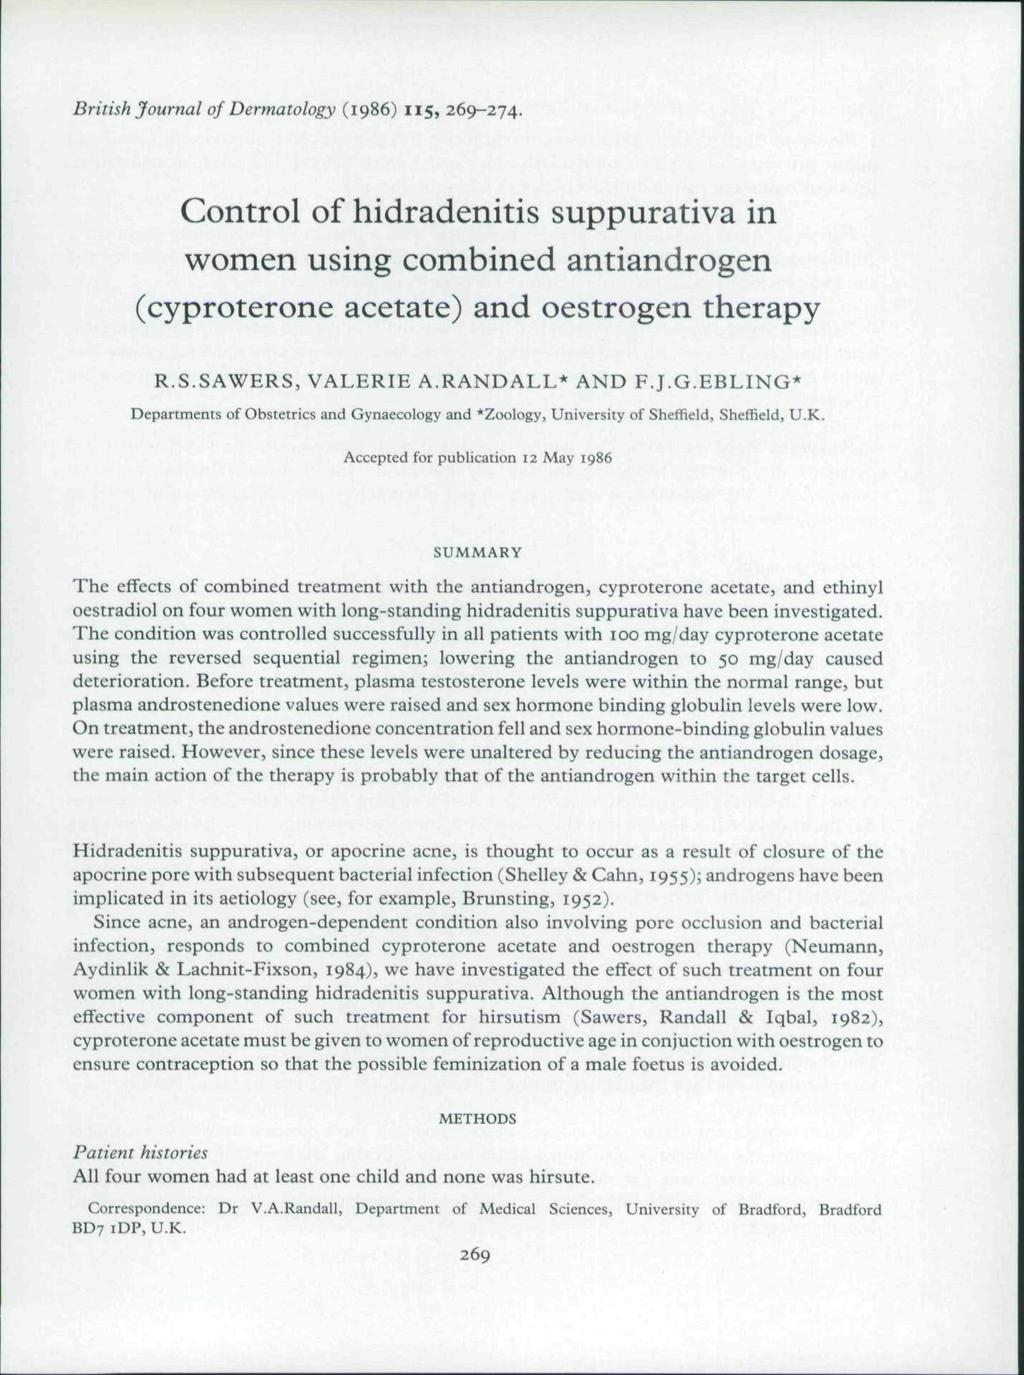 British Journal of Dermatology (1986) 115, 269-274. Control of hidradenitis suppurativa in women using combined antiandrogen (cyproterone acetate) and oestrogen therapy R.S.SAWERS, VALERIE A.